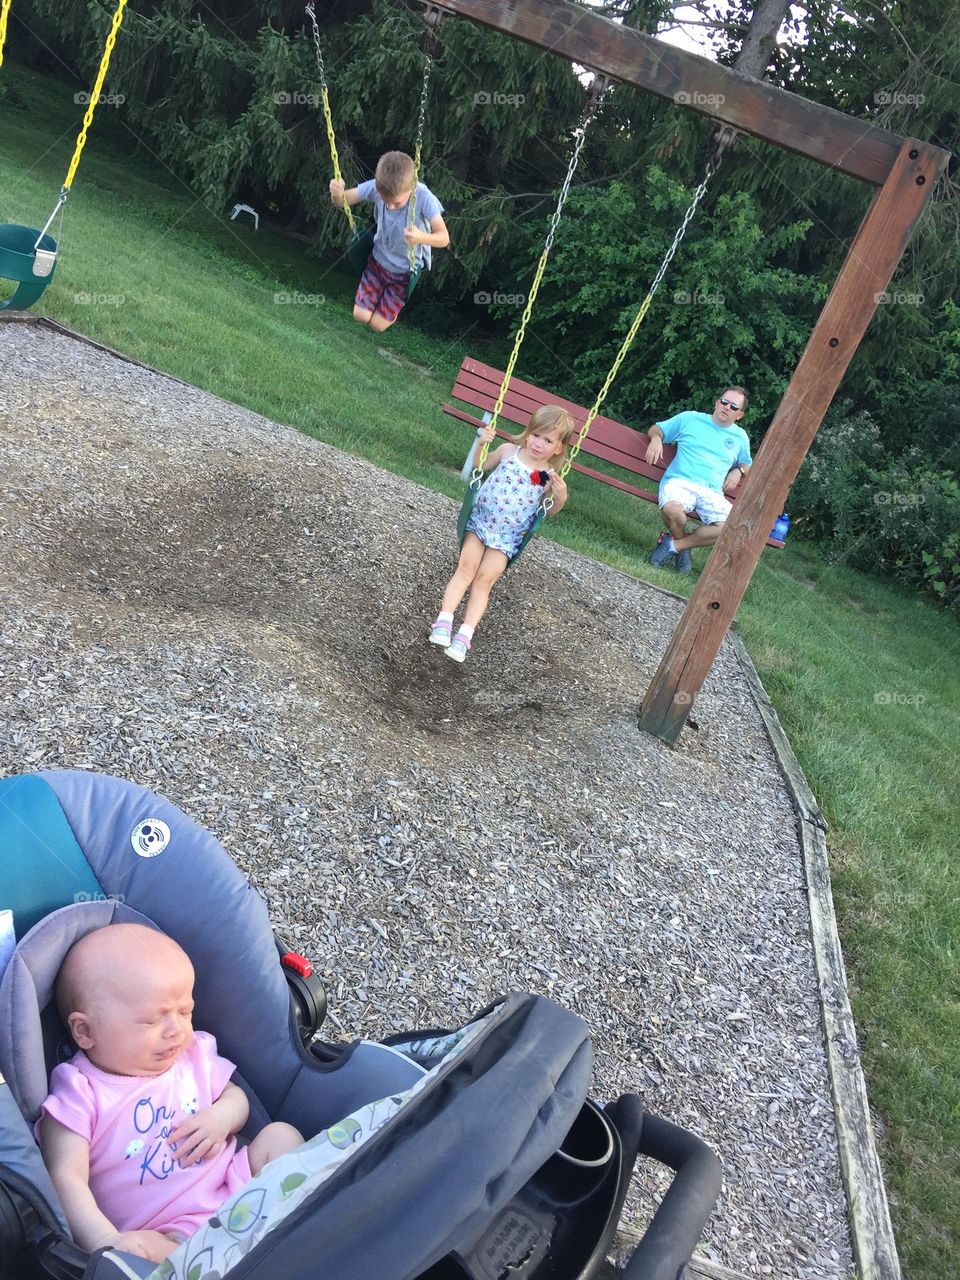 A trip to the park with daddy